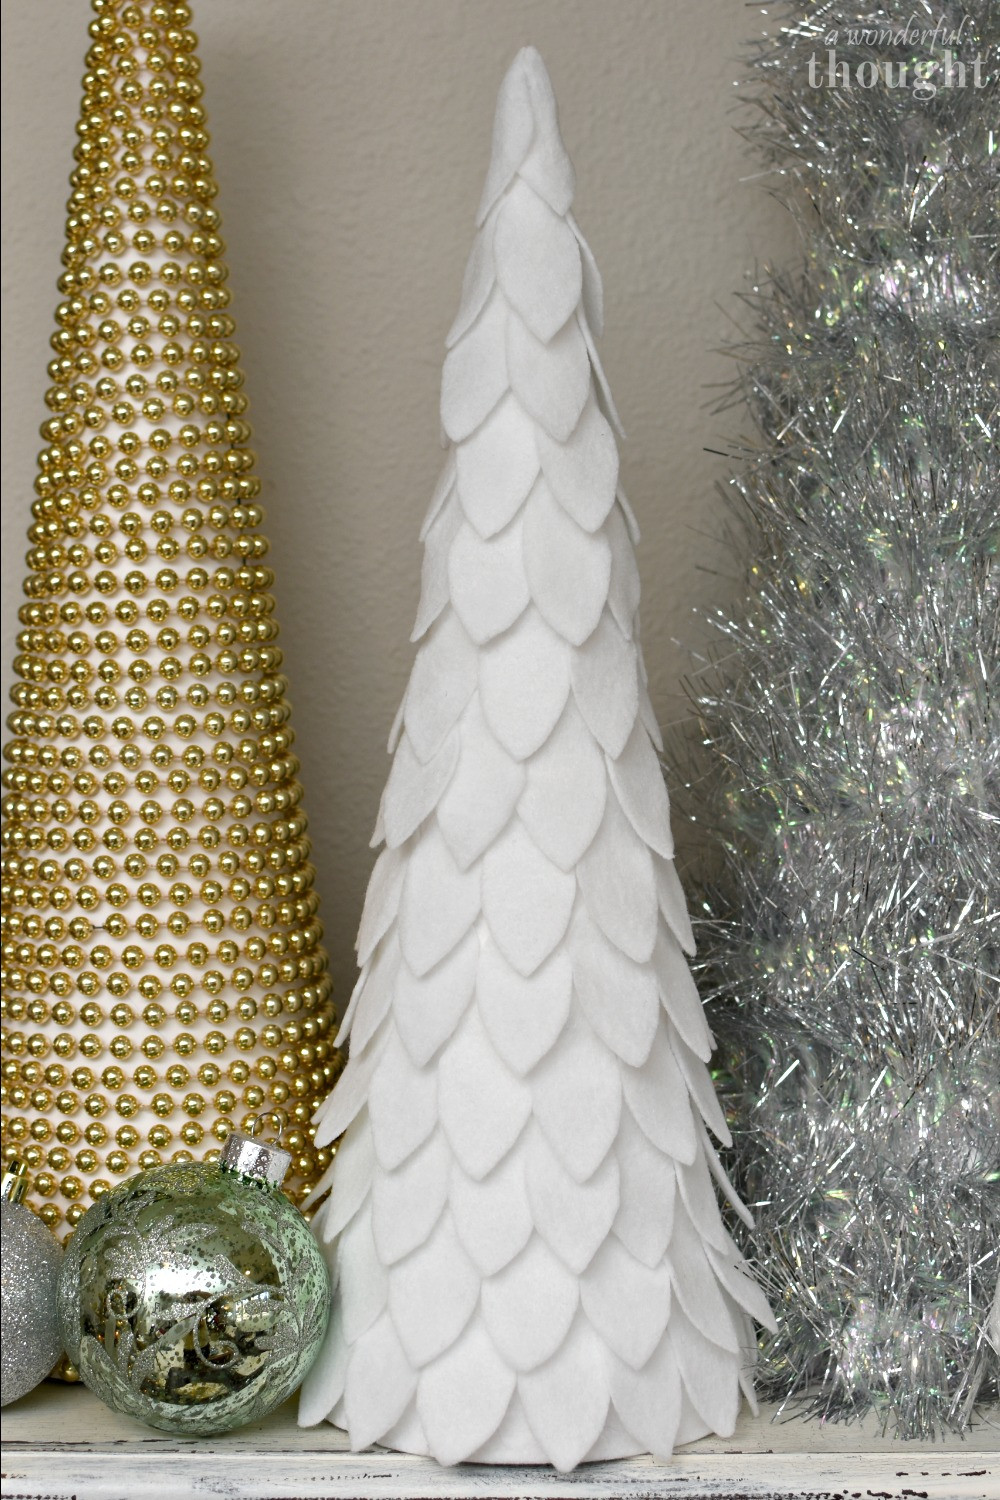 DIY Christmas Tree Cone
 DIY Cone Christmas Trees A Wonderful Thought